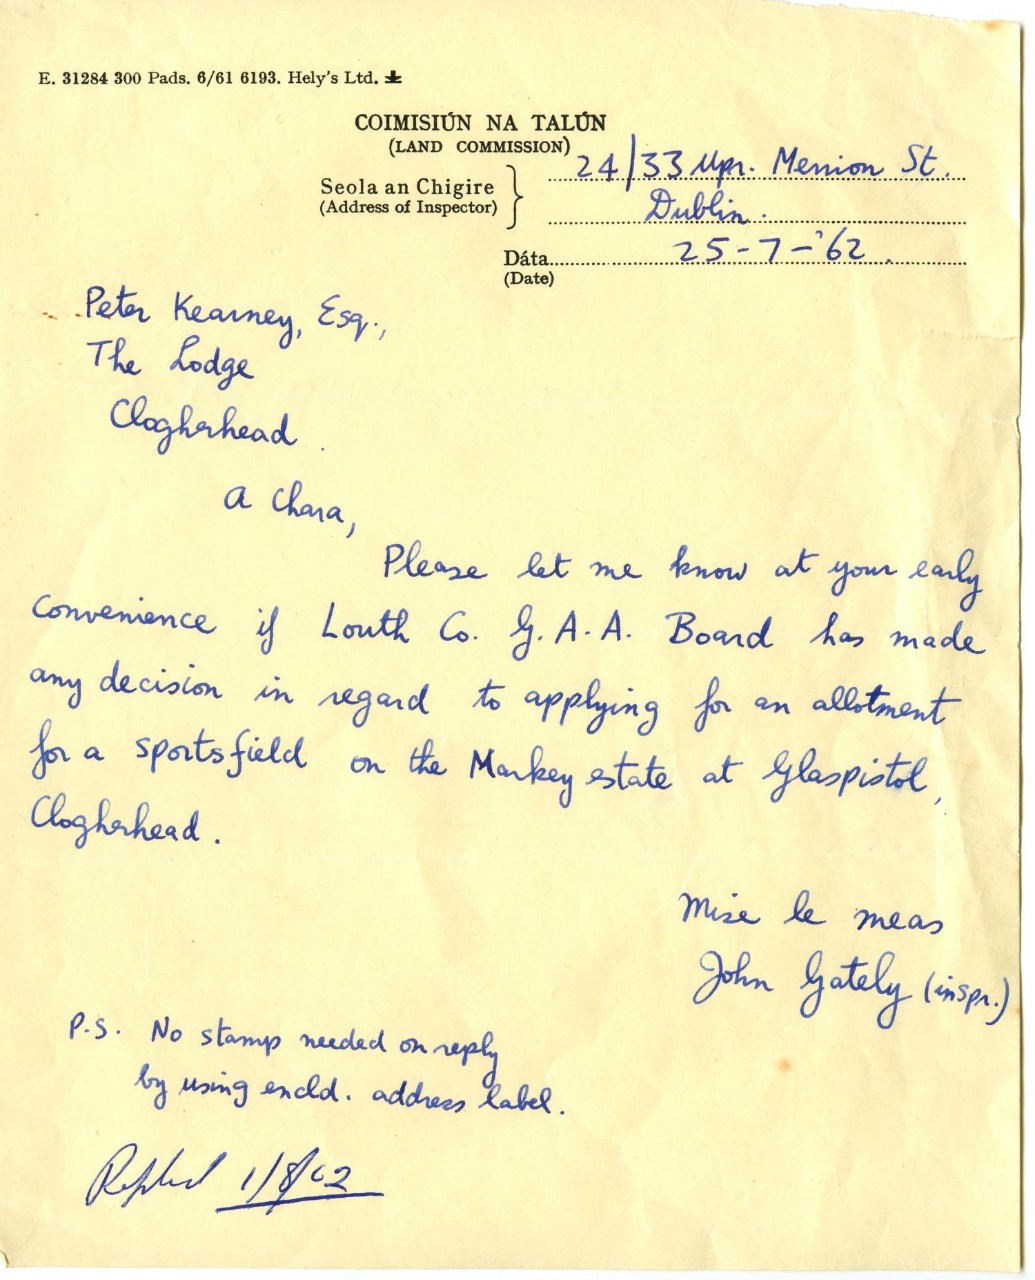 Letter from the Land Commission to Peadar Kearney, Secretary/Treasurer of Louth GAA Board, wondering if the board had made any decision on whether or not to apply for a portion of the Markey Estate at Clogherhead.